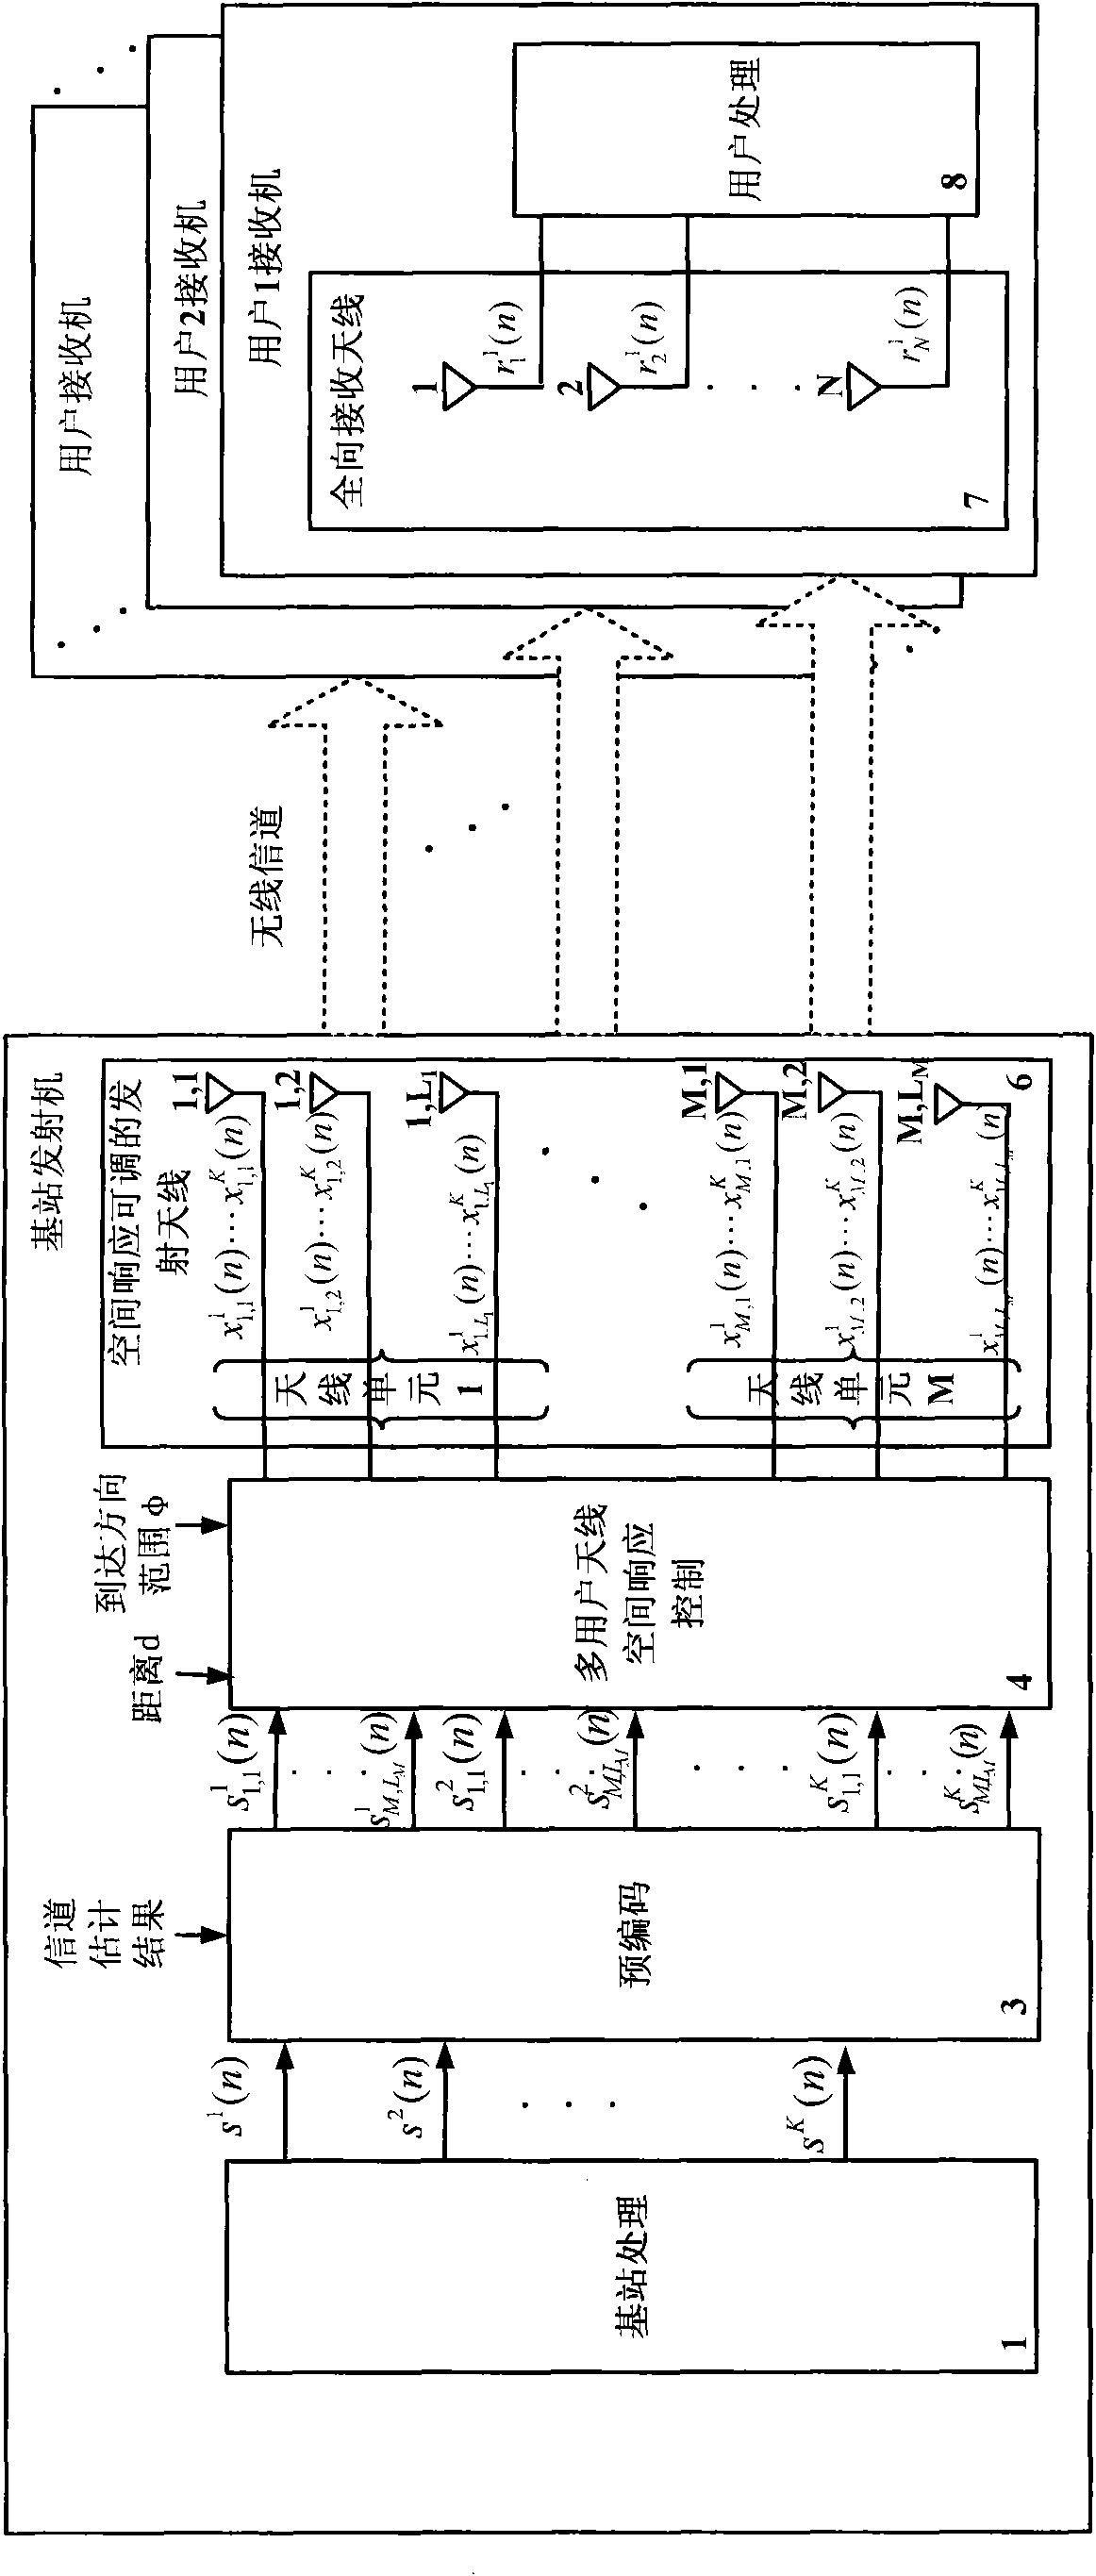 Signal emission method and device of down link in multi-user MIMO (Multiple Input Multiple Output) system